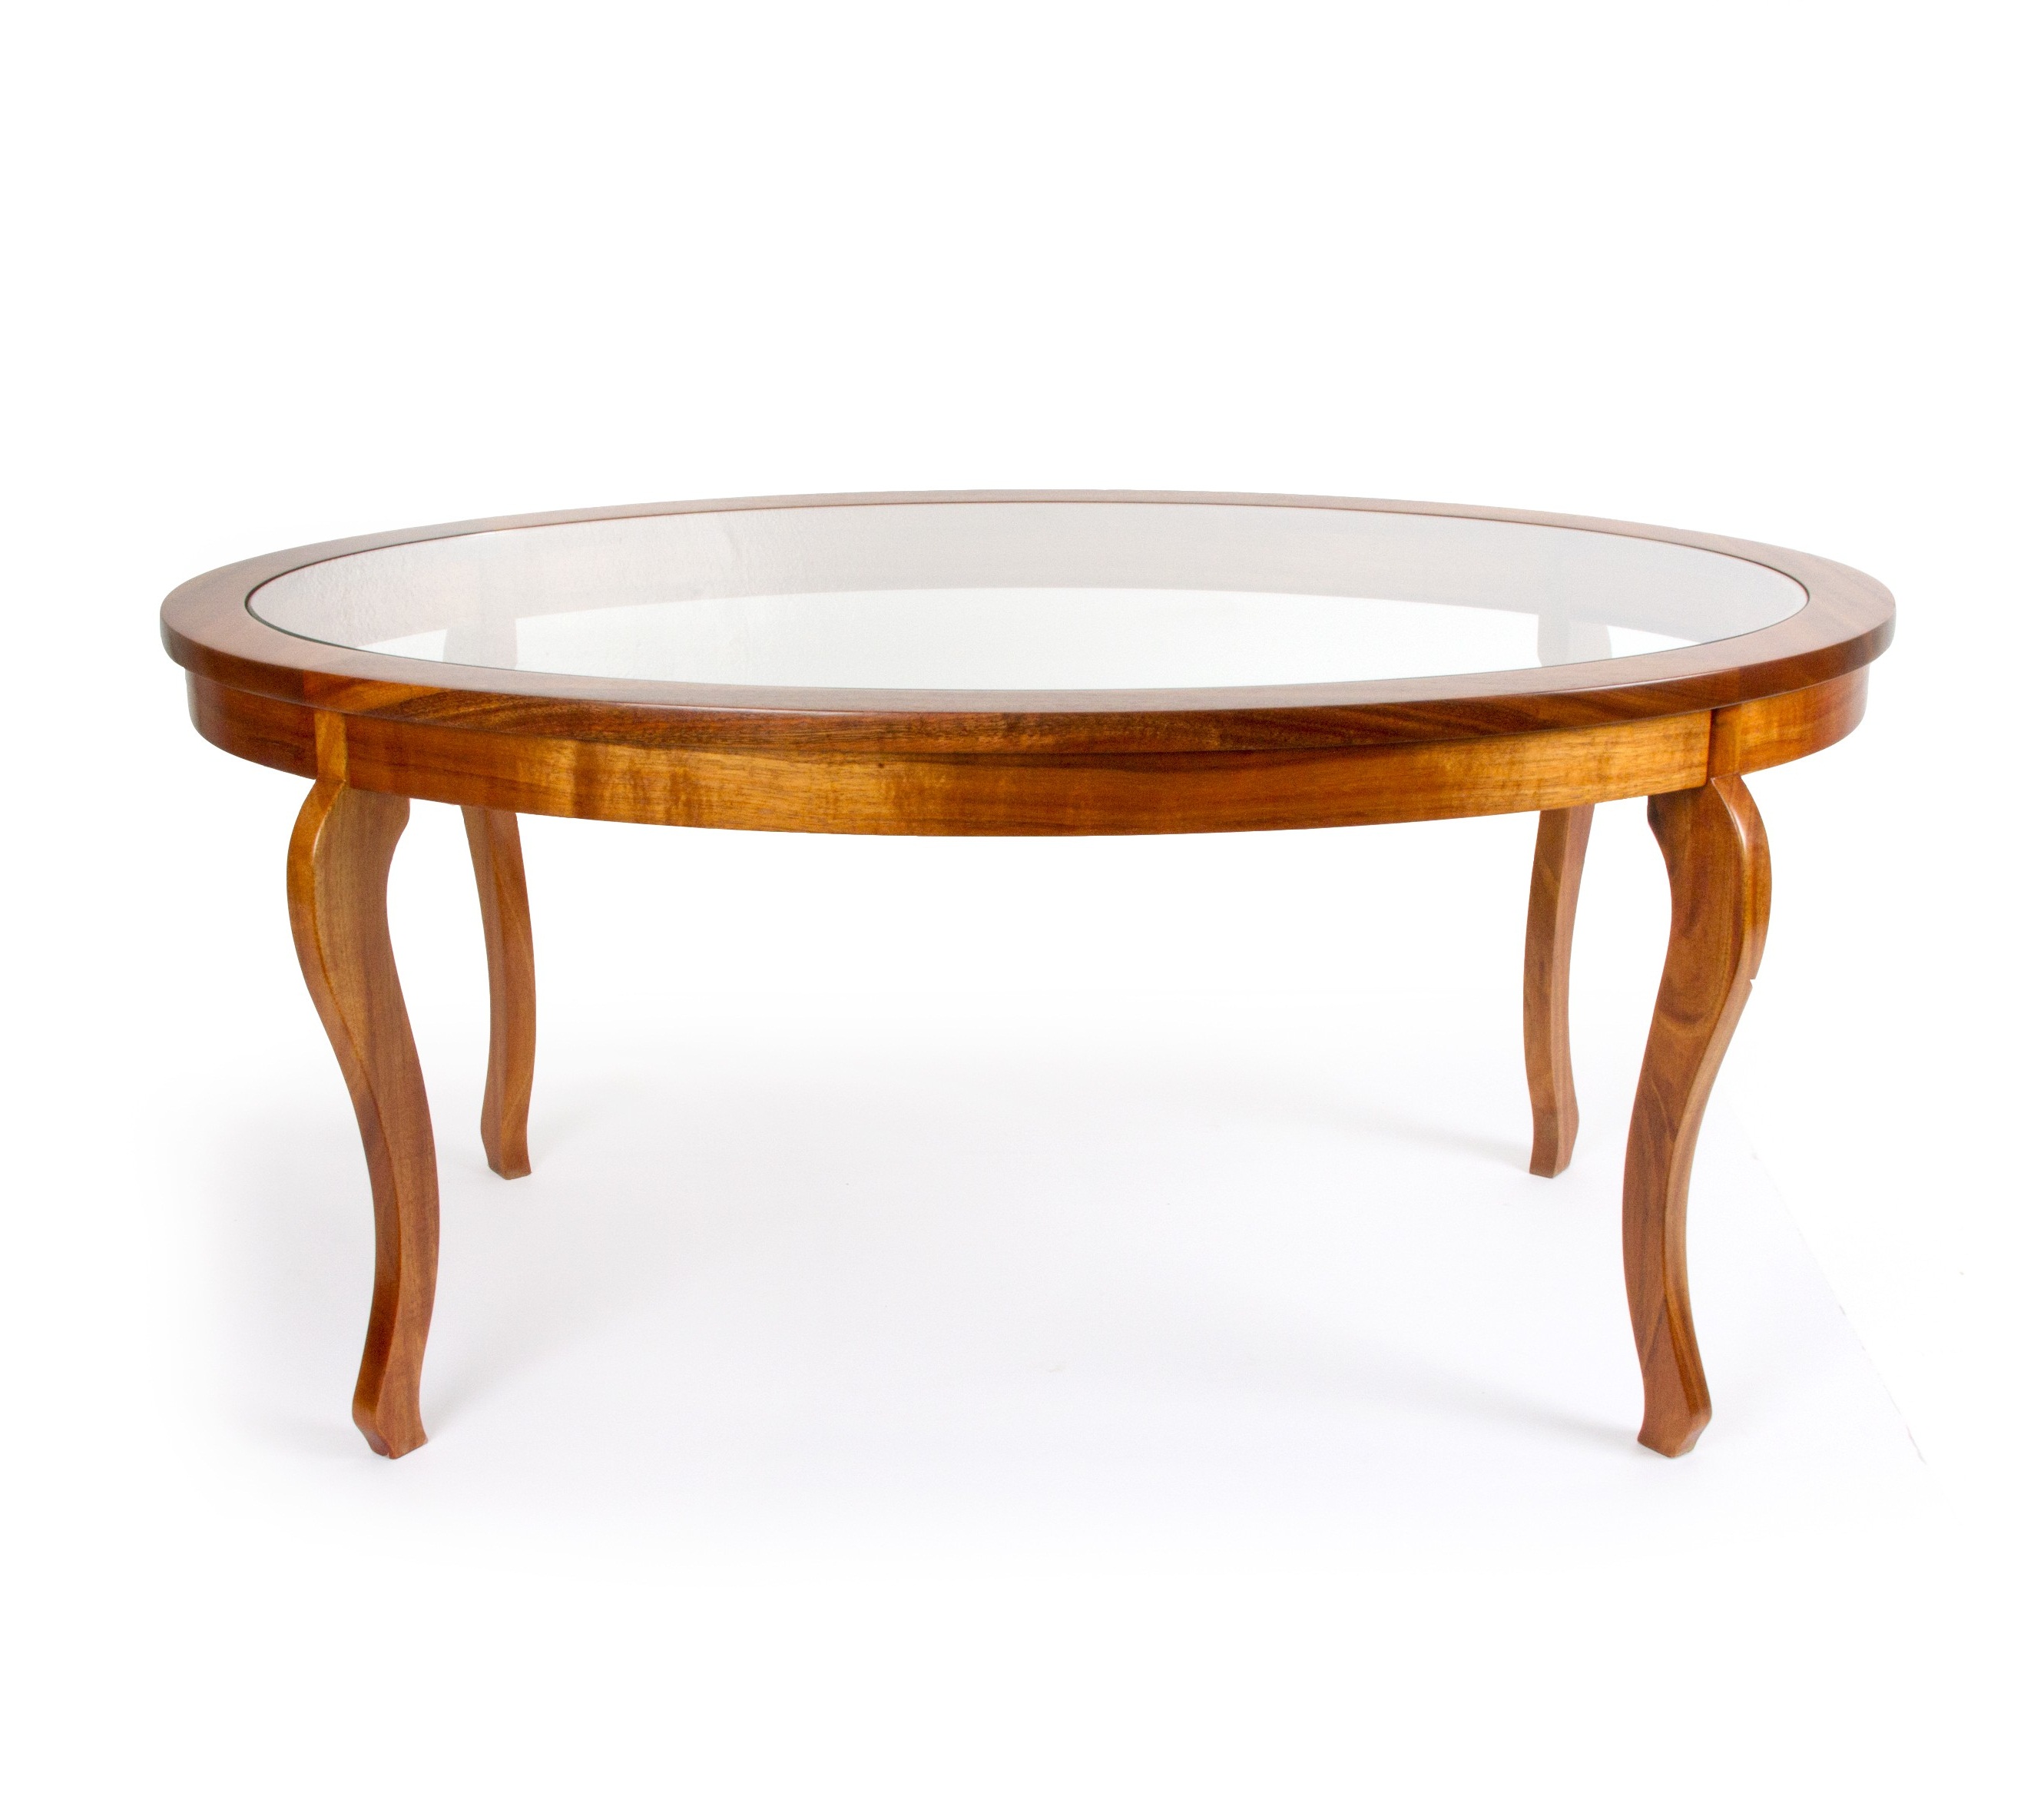 coffee tables ideas top table glass replacement marvelous round decorations furniture contemporary popular product classic fashion oak end with additional feauture amazing cool